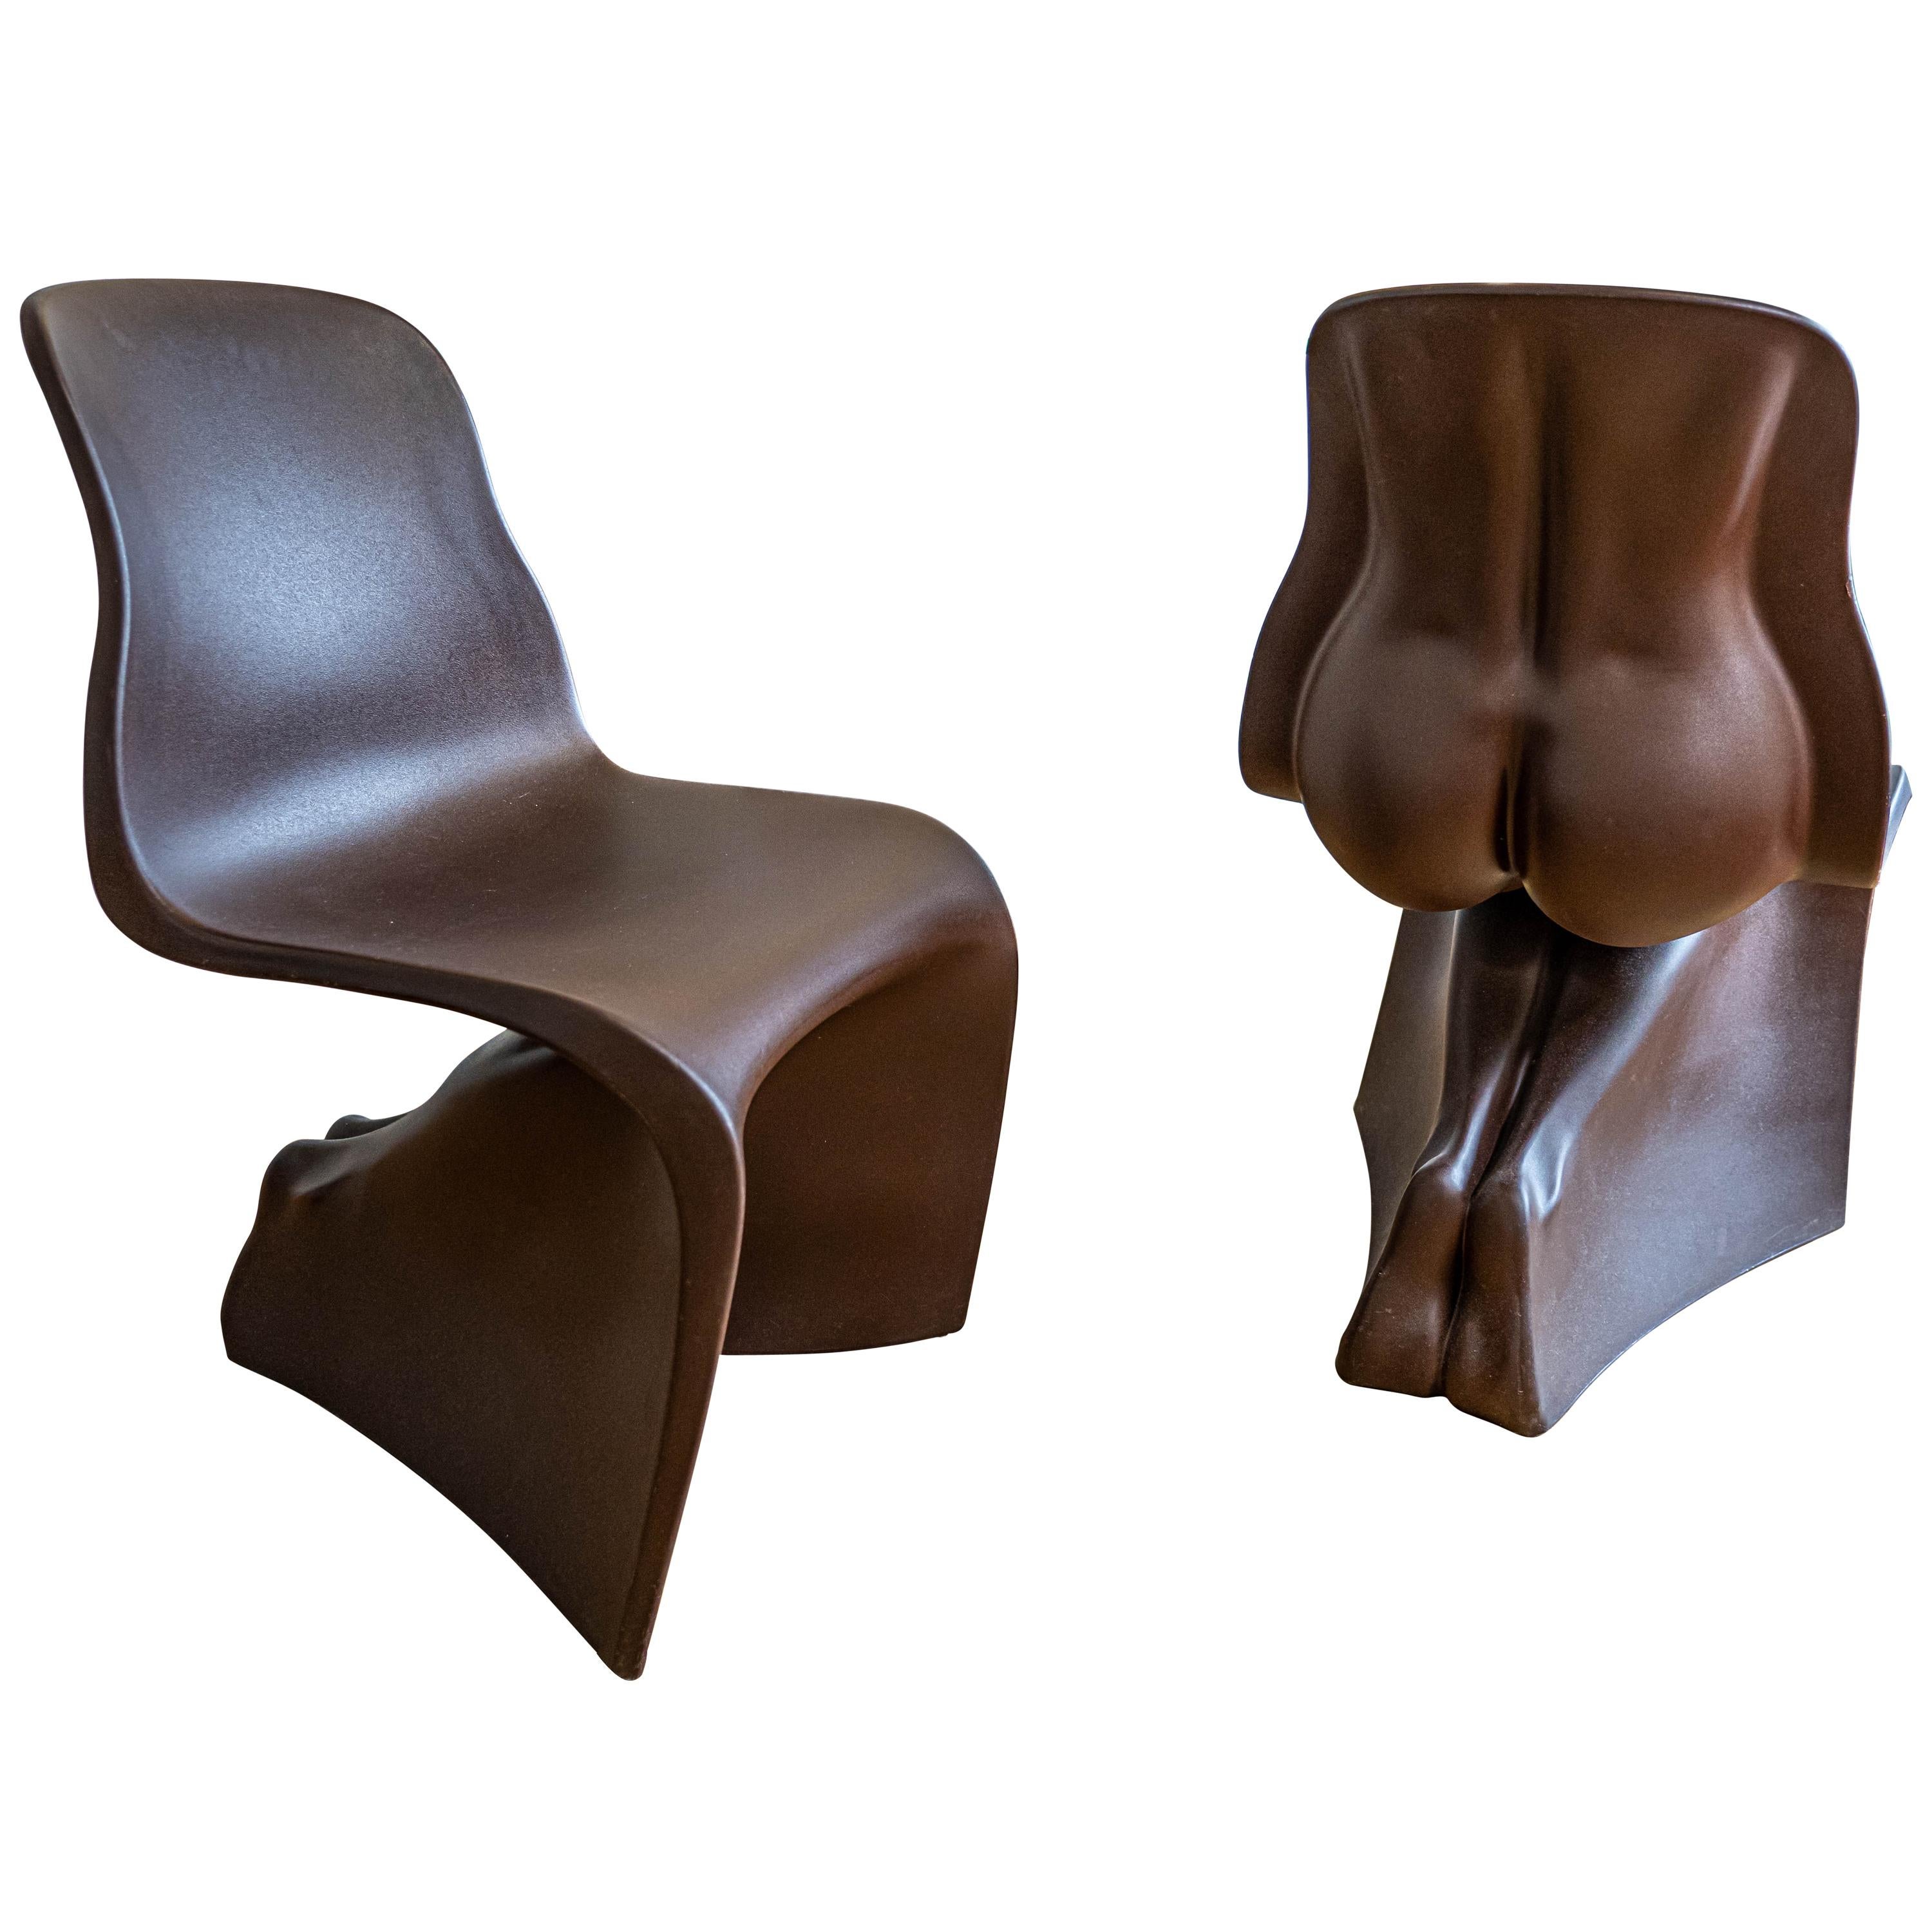 Pair of Brown "Her" Chairs by Fabio Novembre